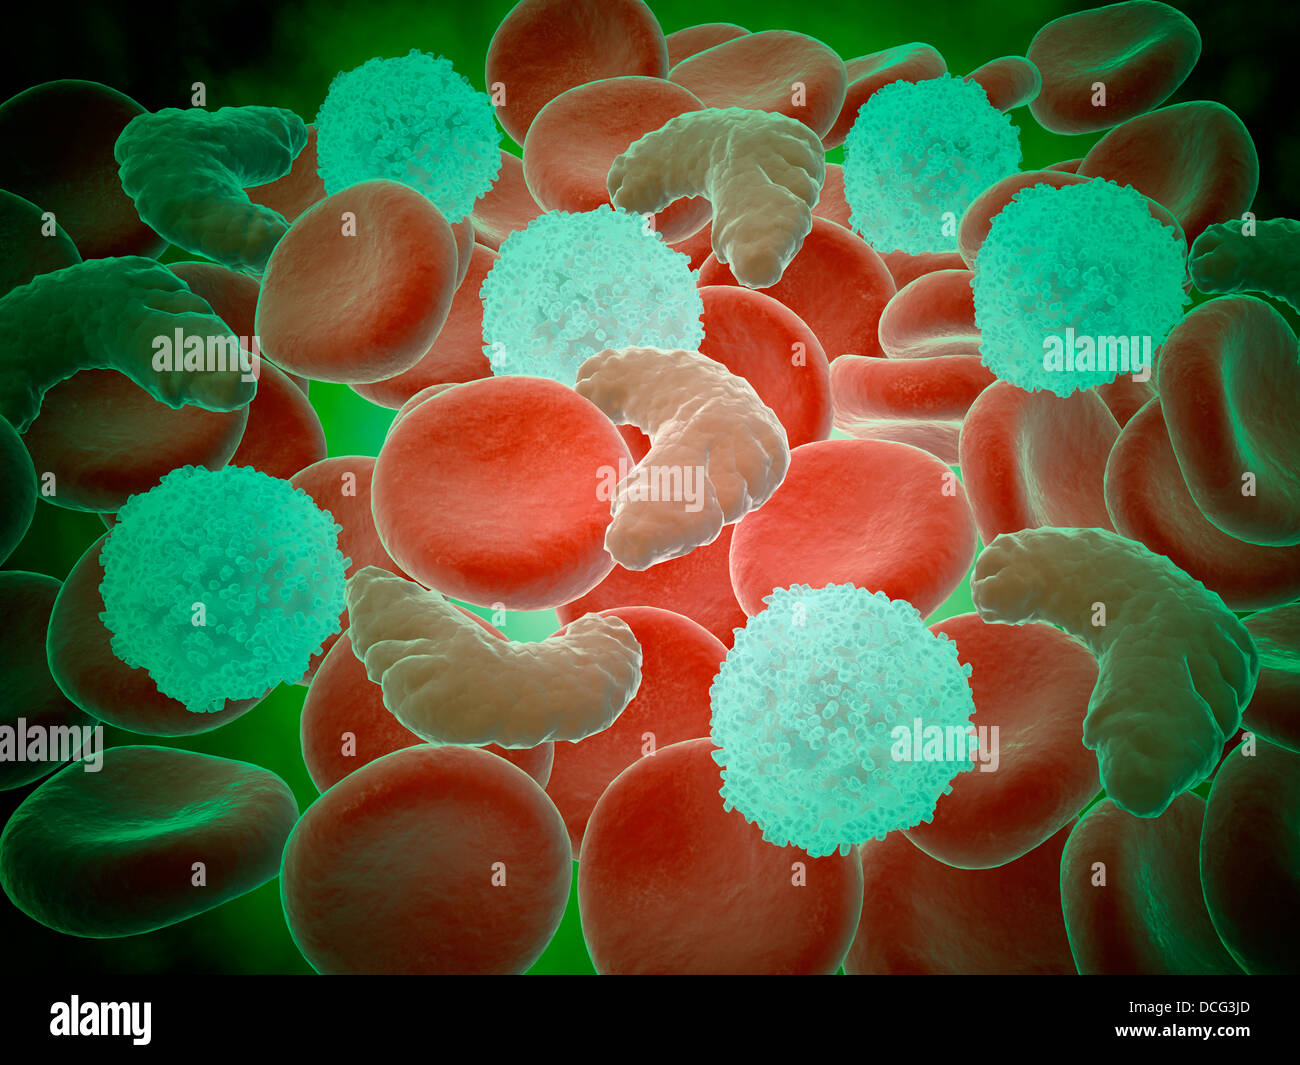 Conceptual image of sickle cell anemia with red blood cells and white bood cells. Stock Photo